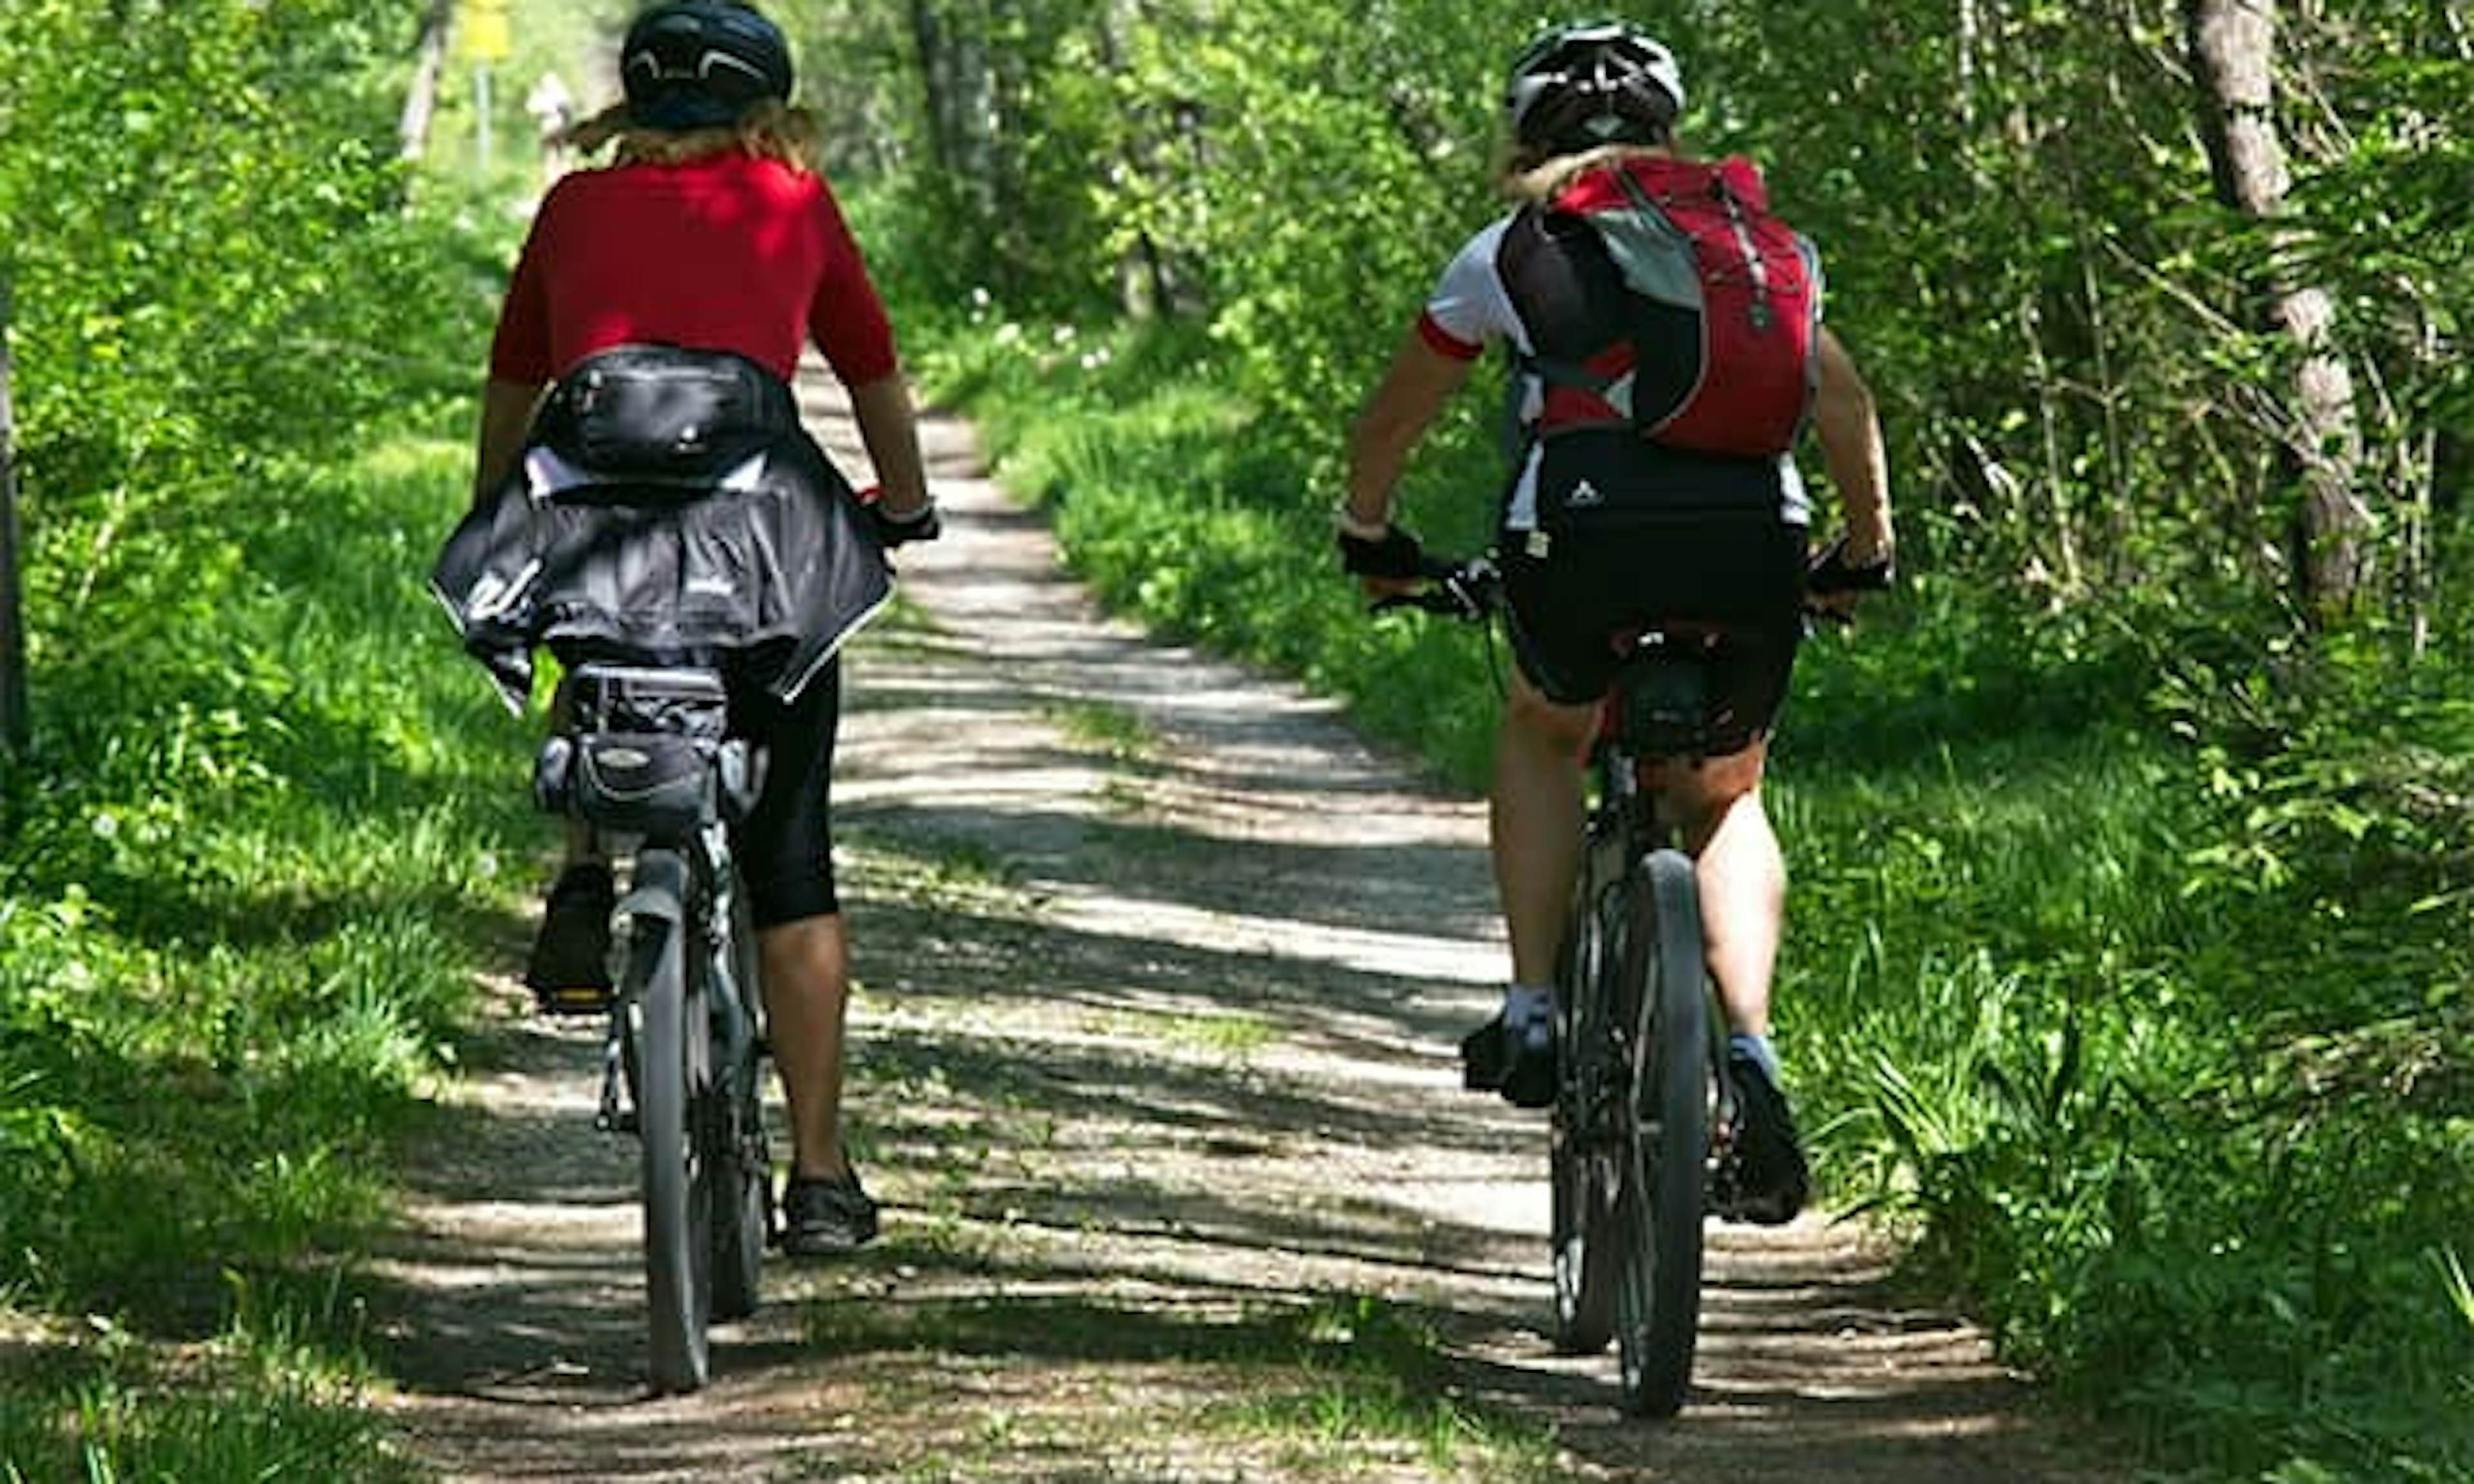 2 cyclists riding through a forest